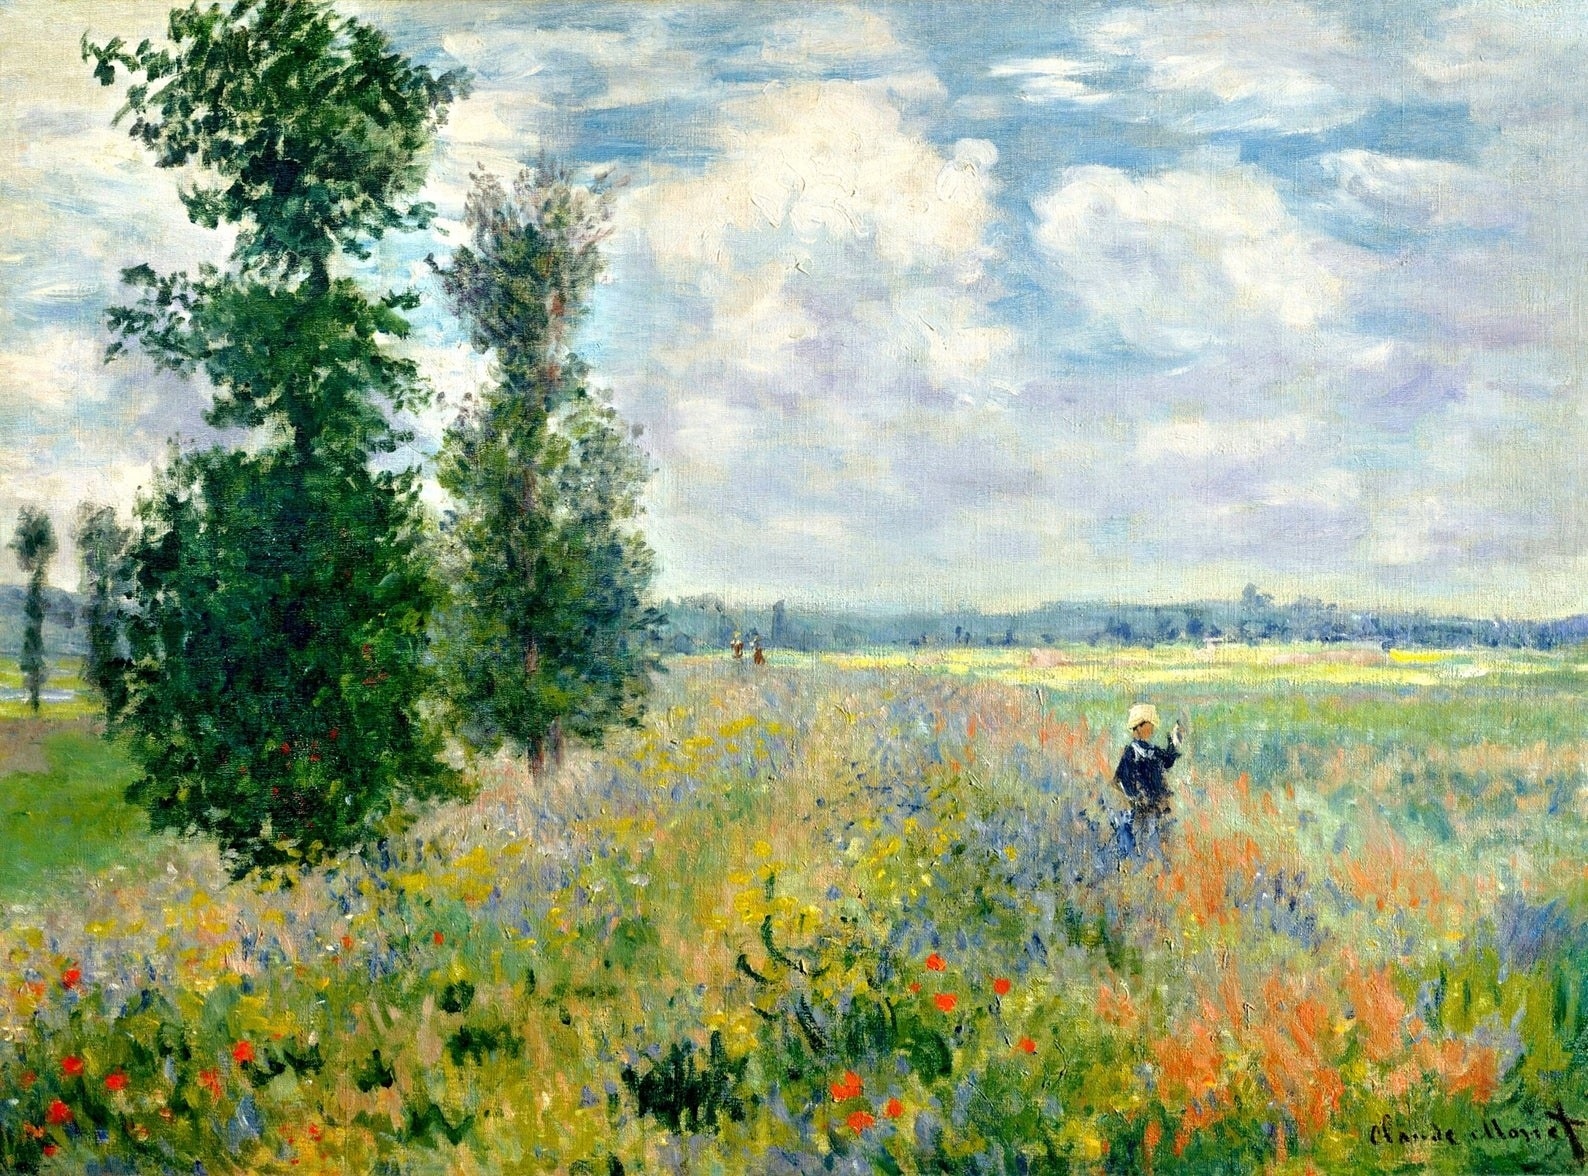 The painting of a flower field with a couple of trees and a person standing in it all